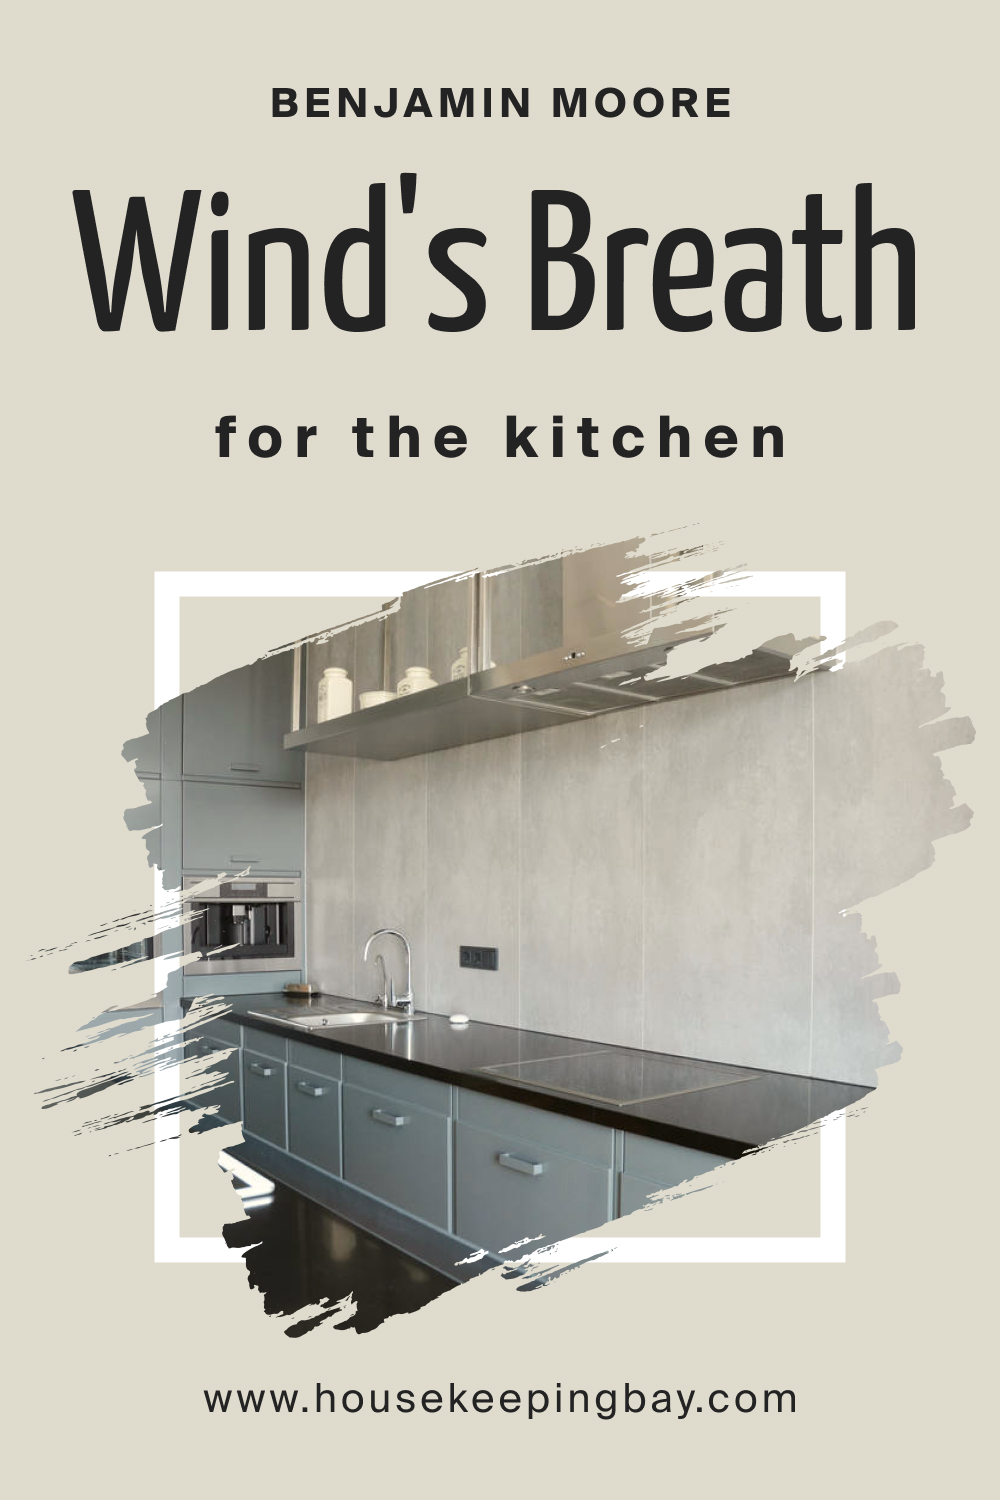 How to Use BM Wind's Breath 981 in the Kitchen?